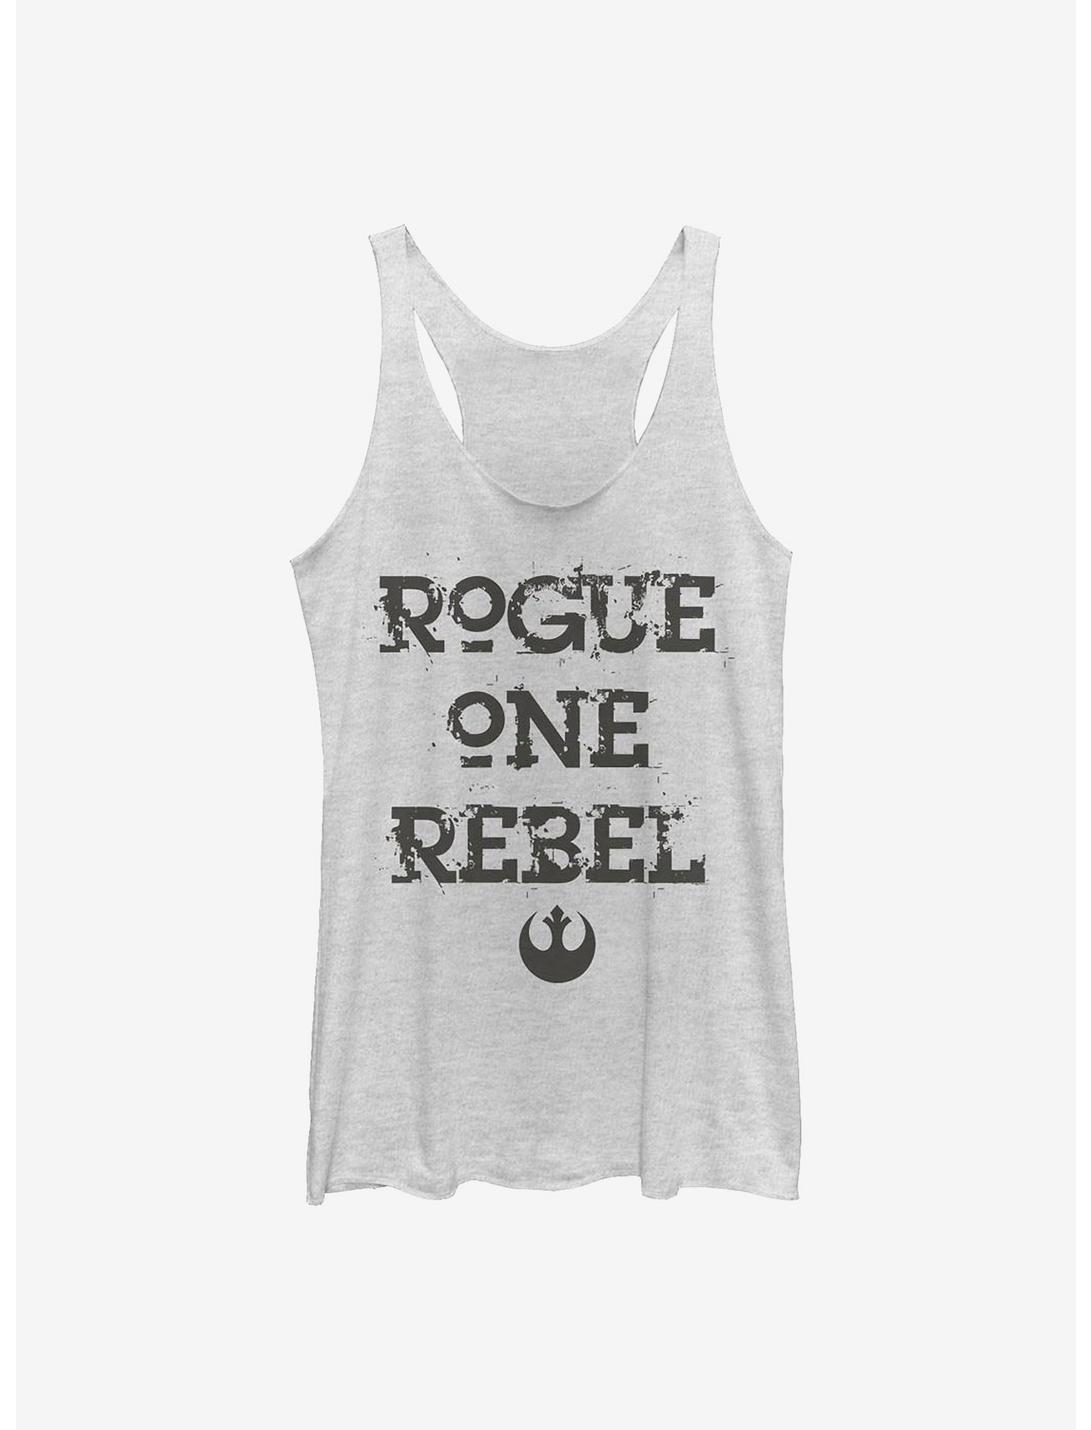 Star Wars Rogue One: A Star Wars Story Rogue One Rebel Girls Tank, WHITE HTR, hi-res